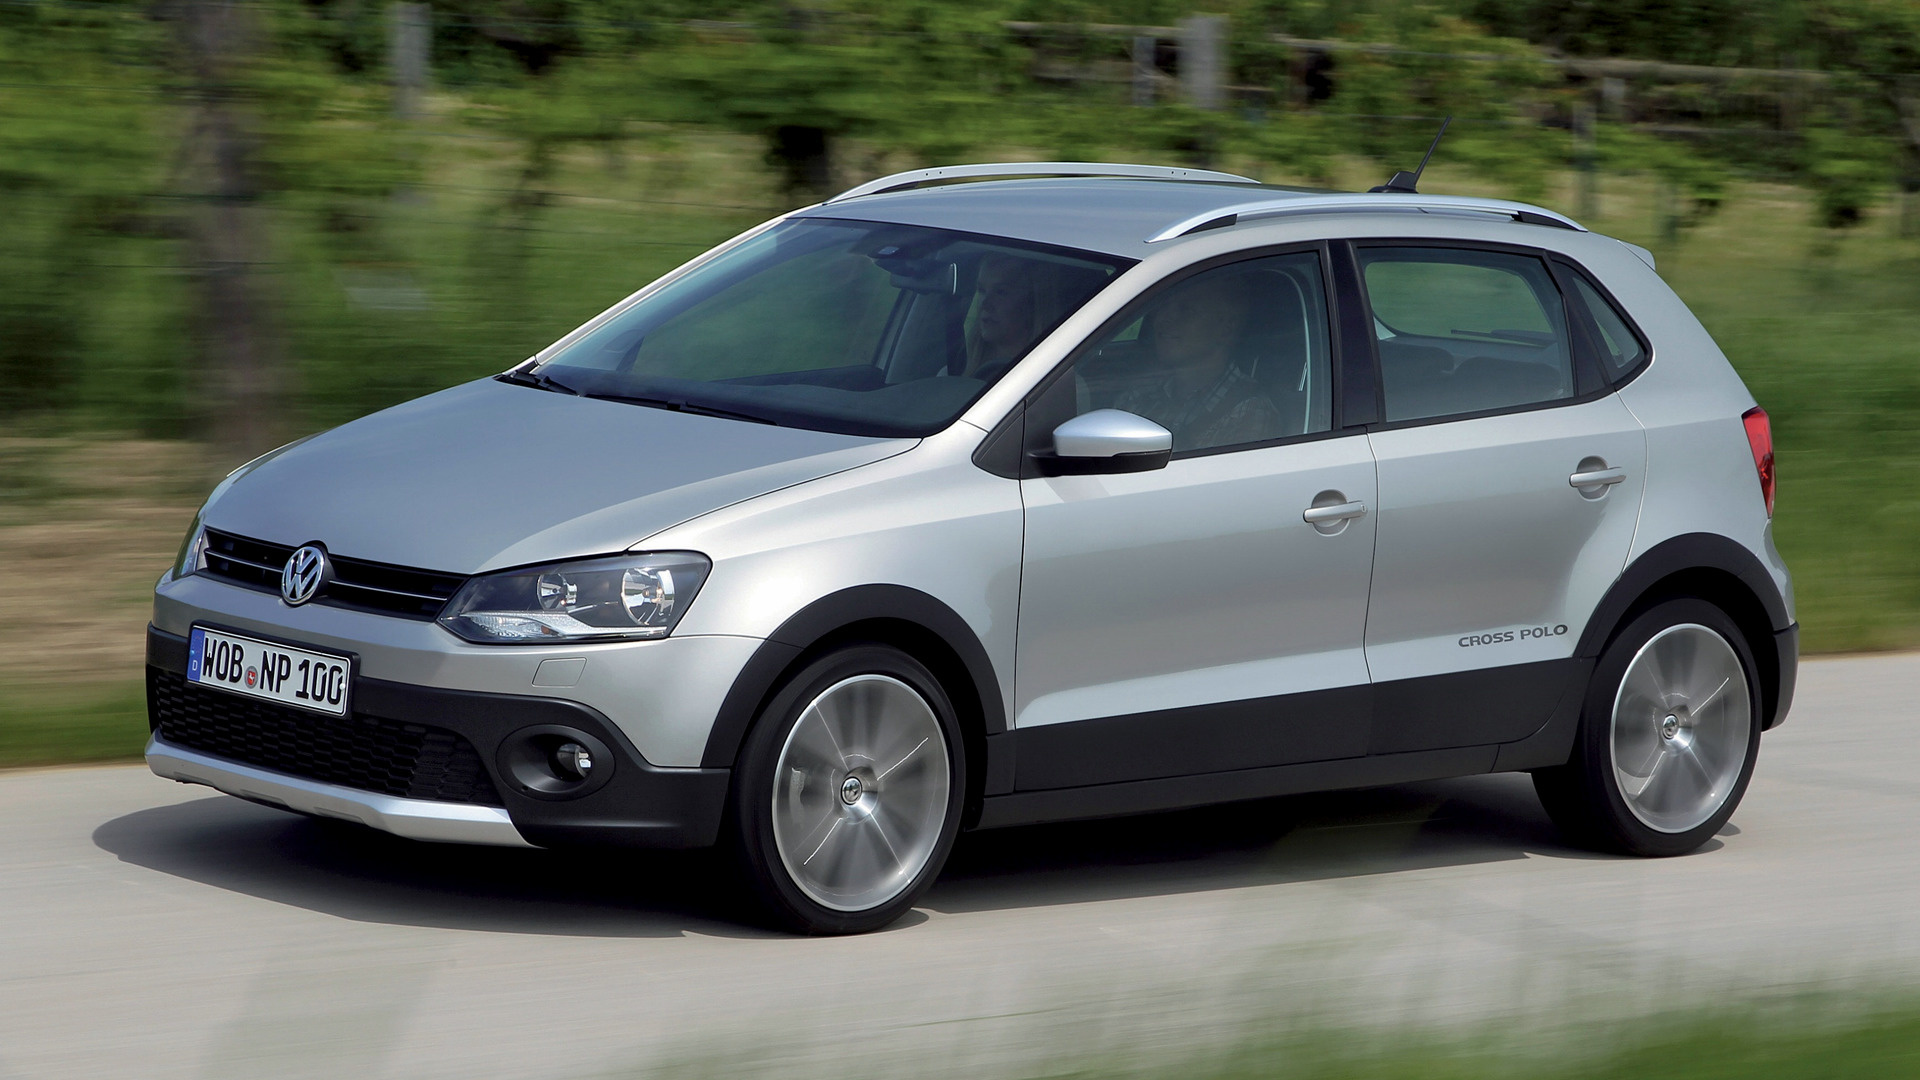 2010 Volkswagen Cross Polo - Wallpapers and HD Images | Car Pixel